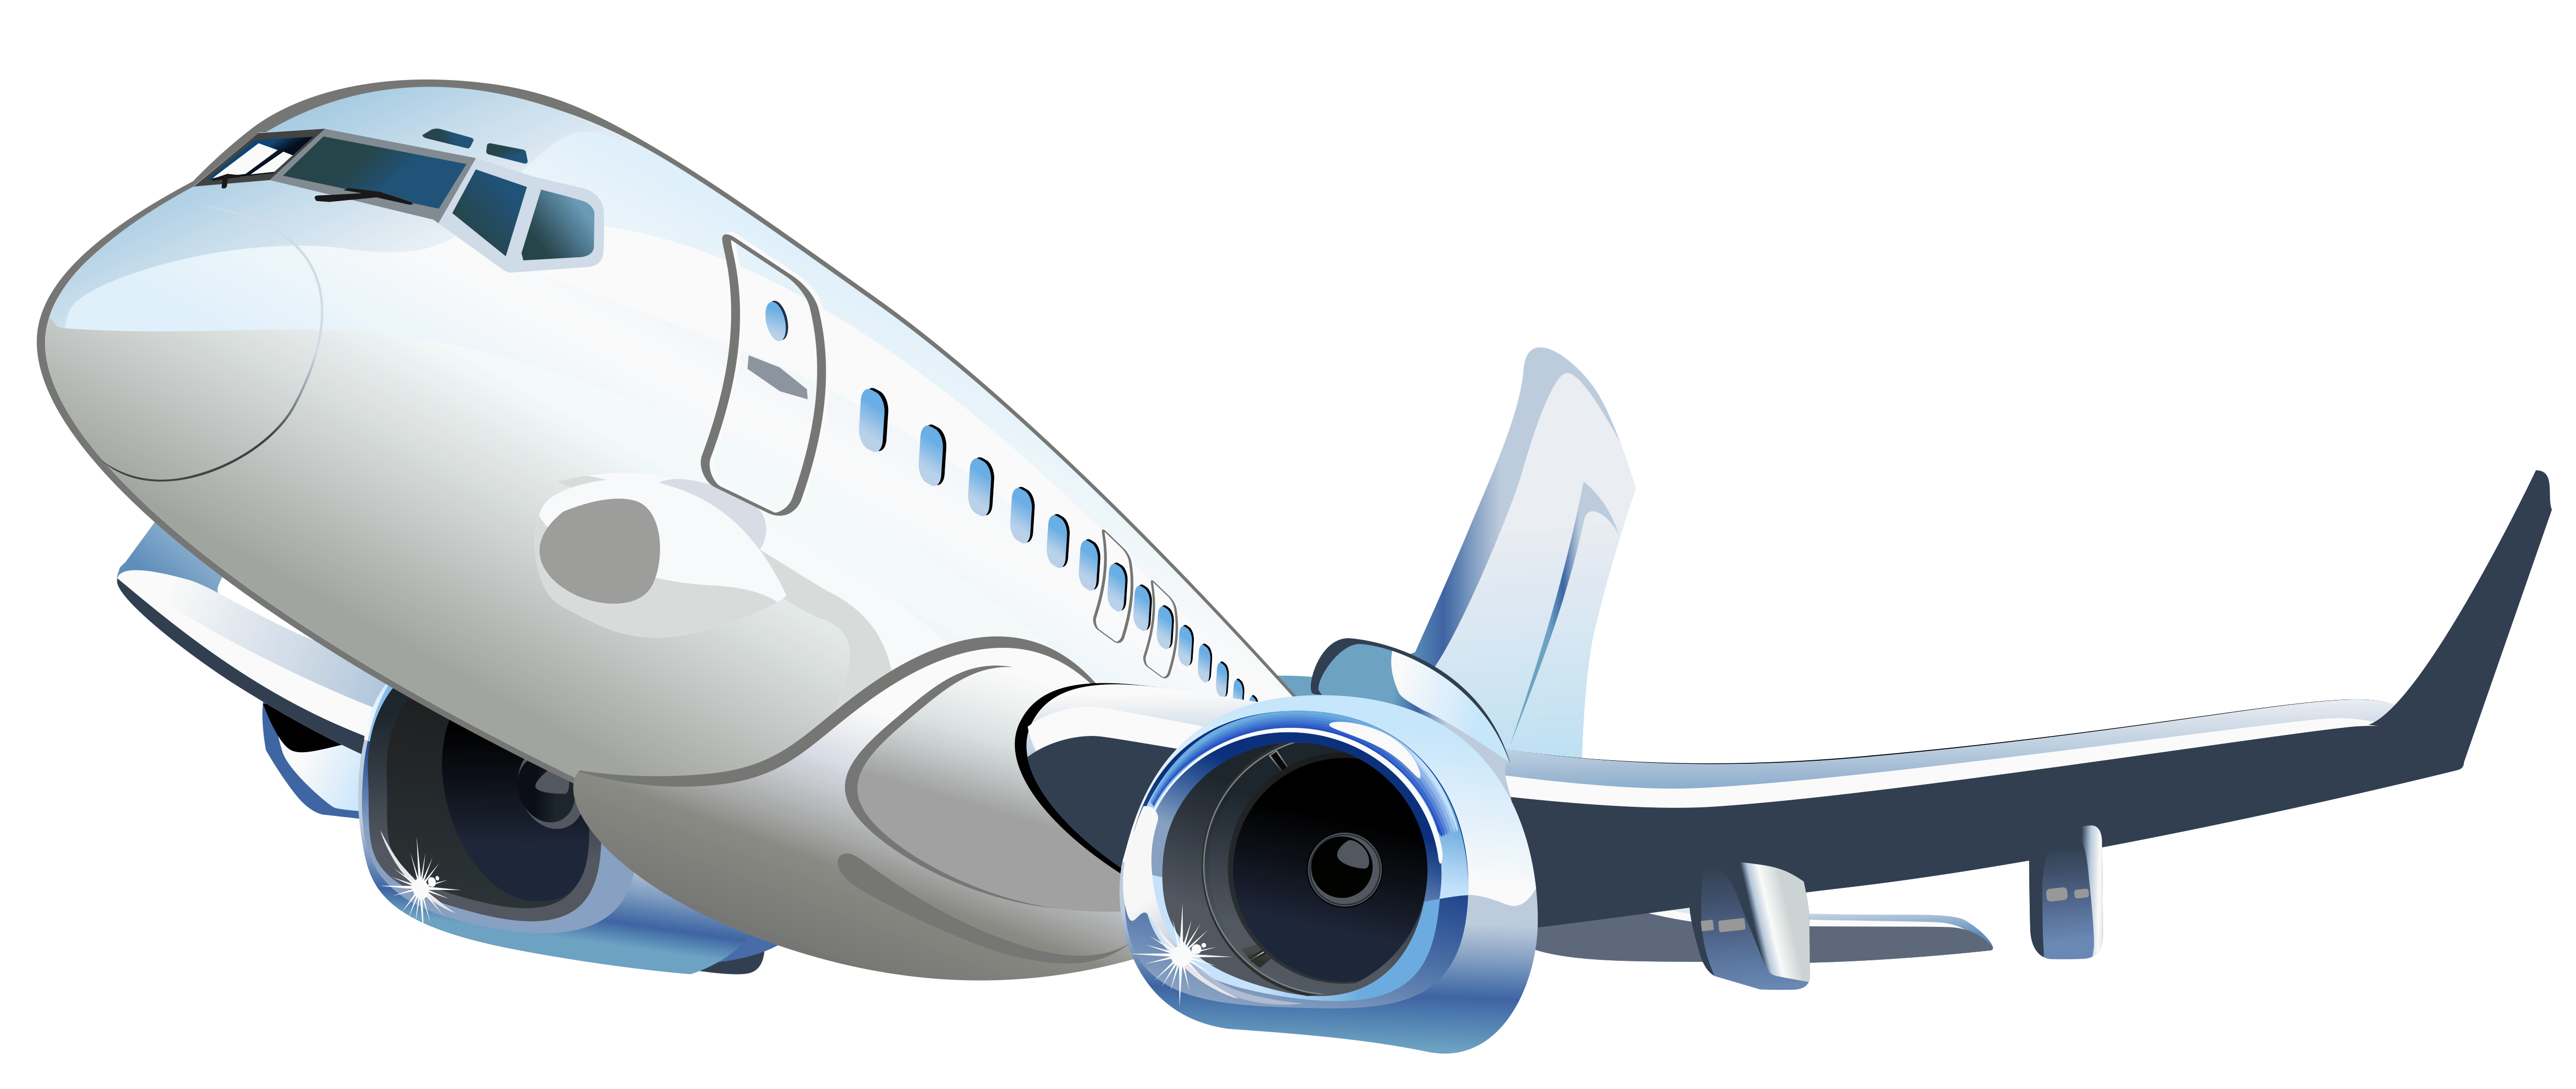 Airplane vector png. Transparent clipart gallery yopriceville